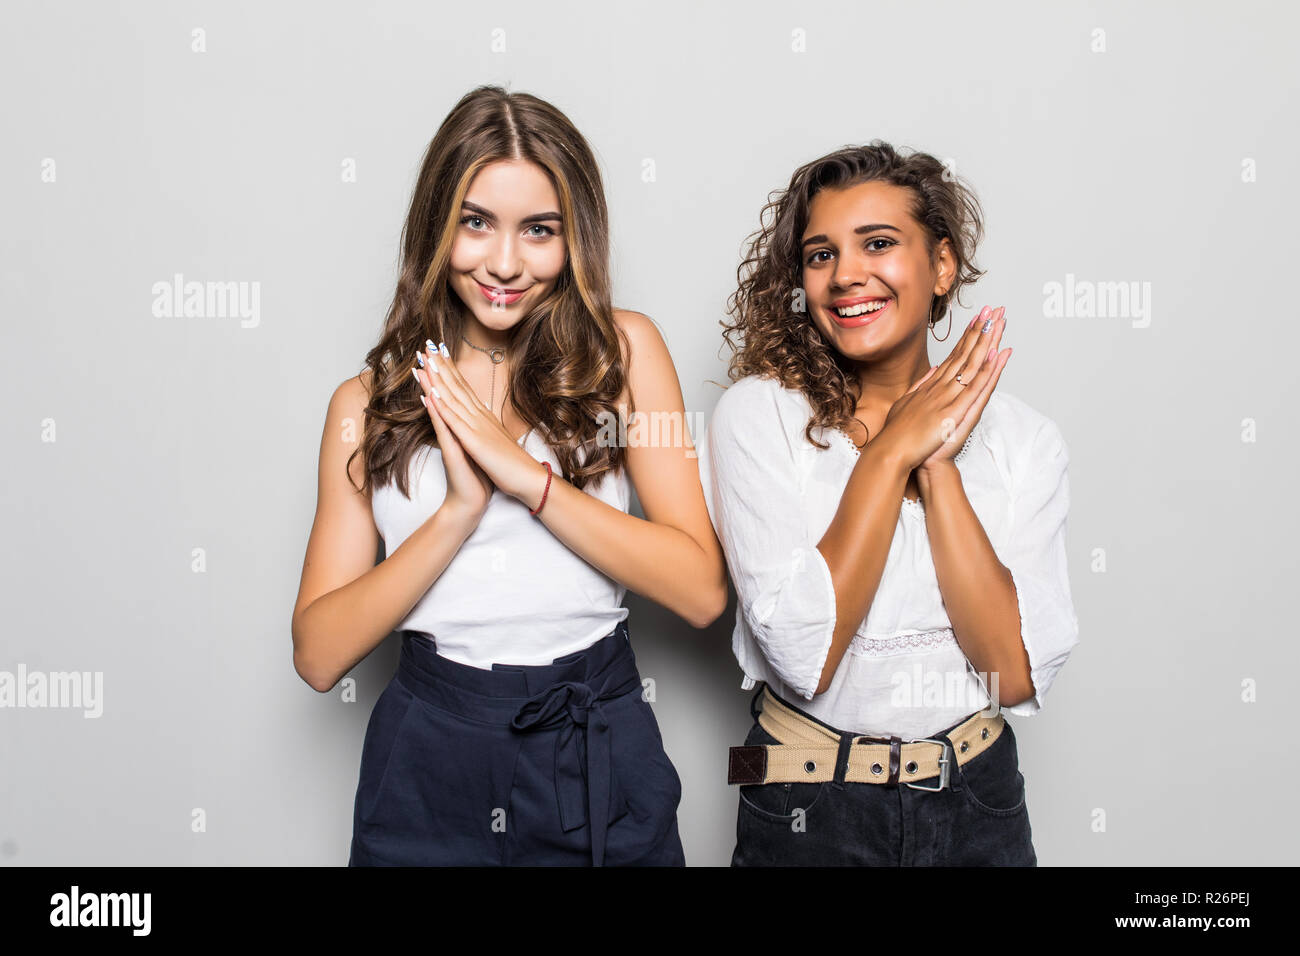 Portrait of pretty charming girls in casual outfits isolated on bright gray background with copyspace for advertising Stock Photo